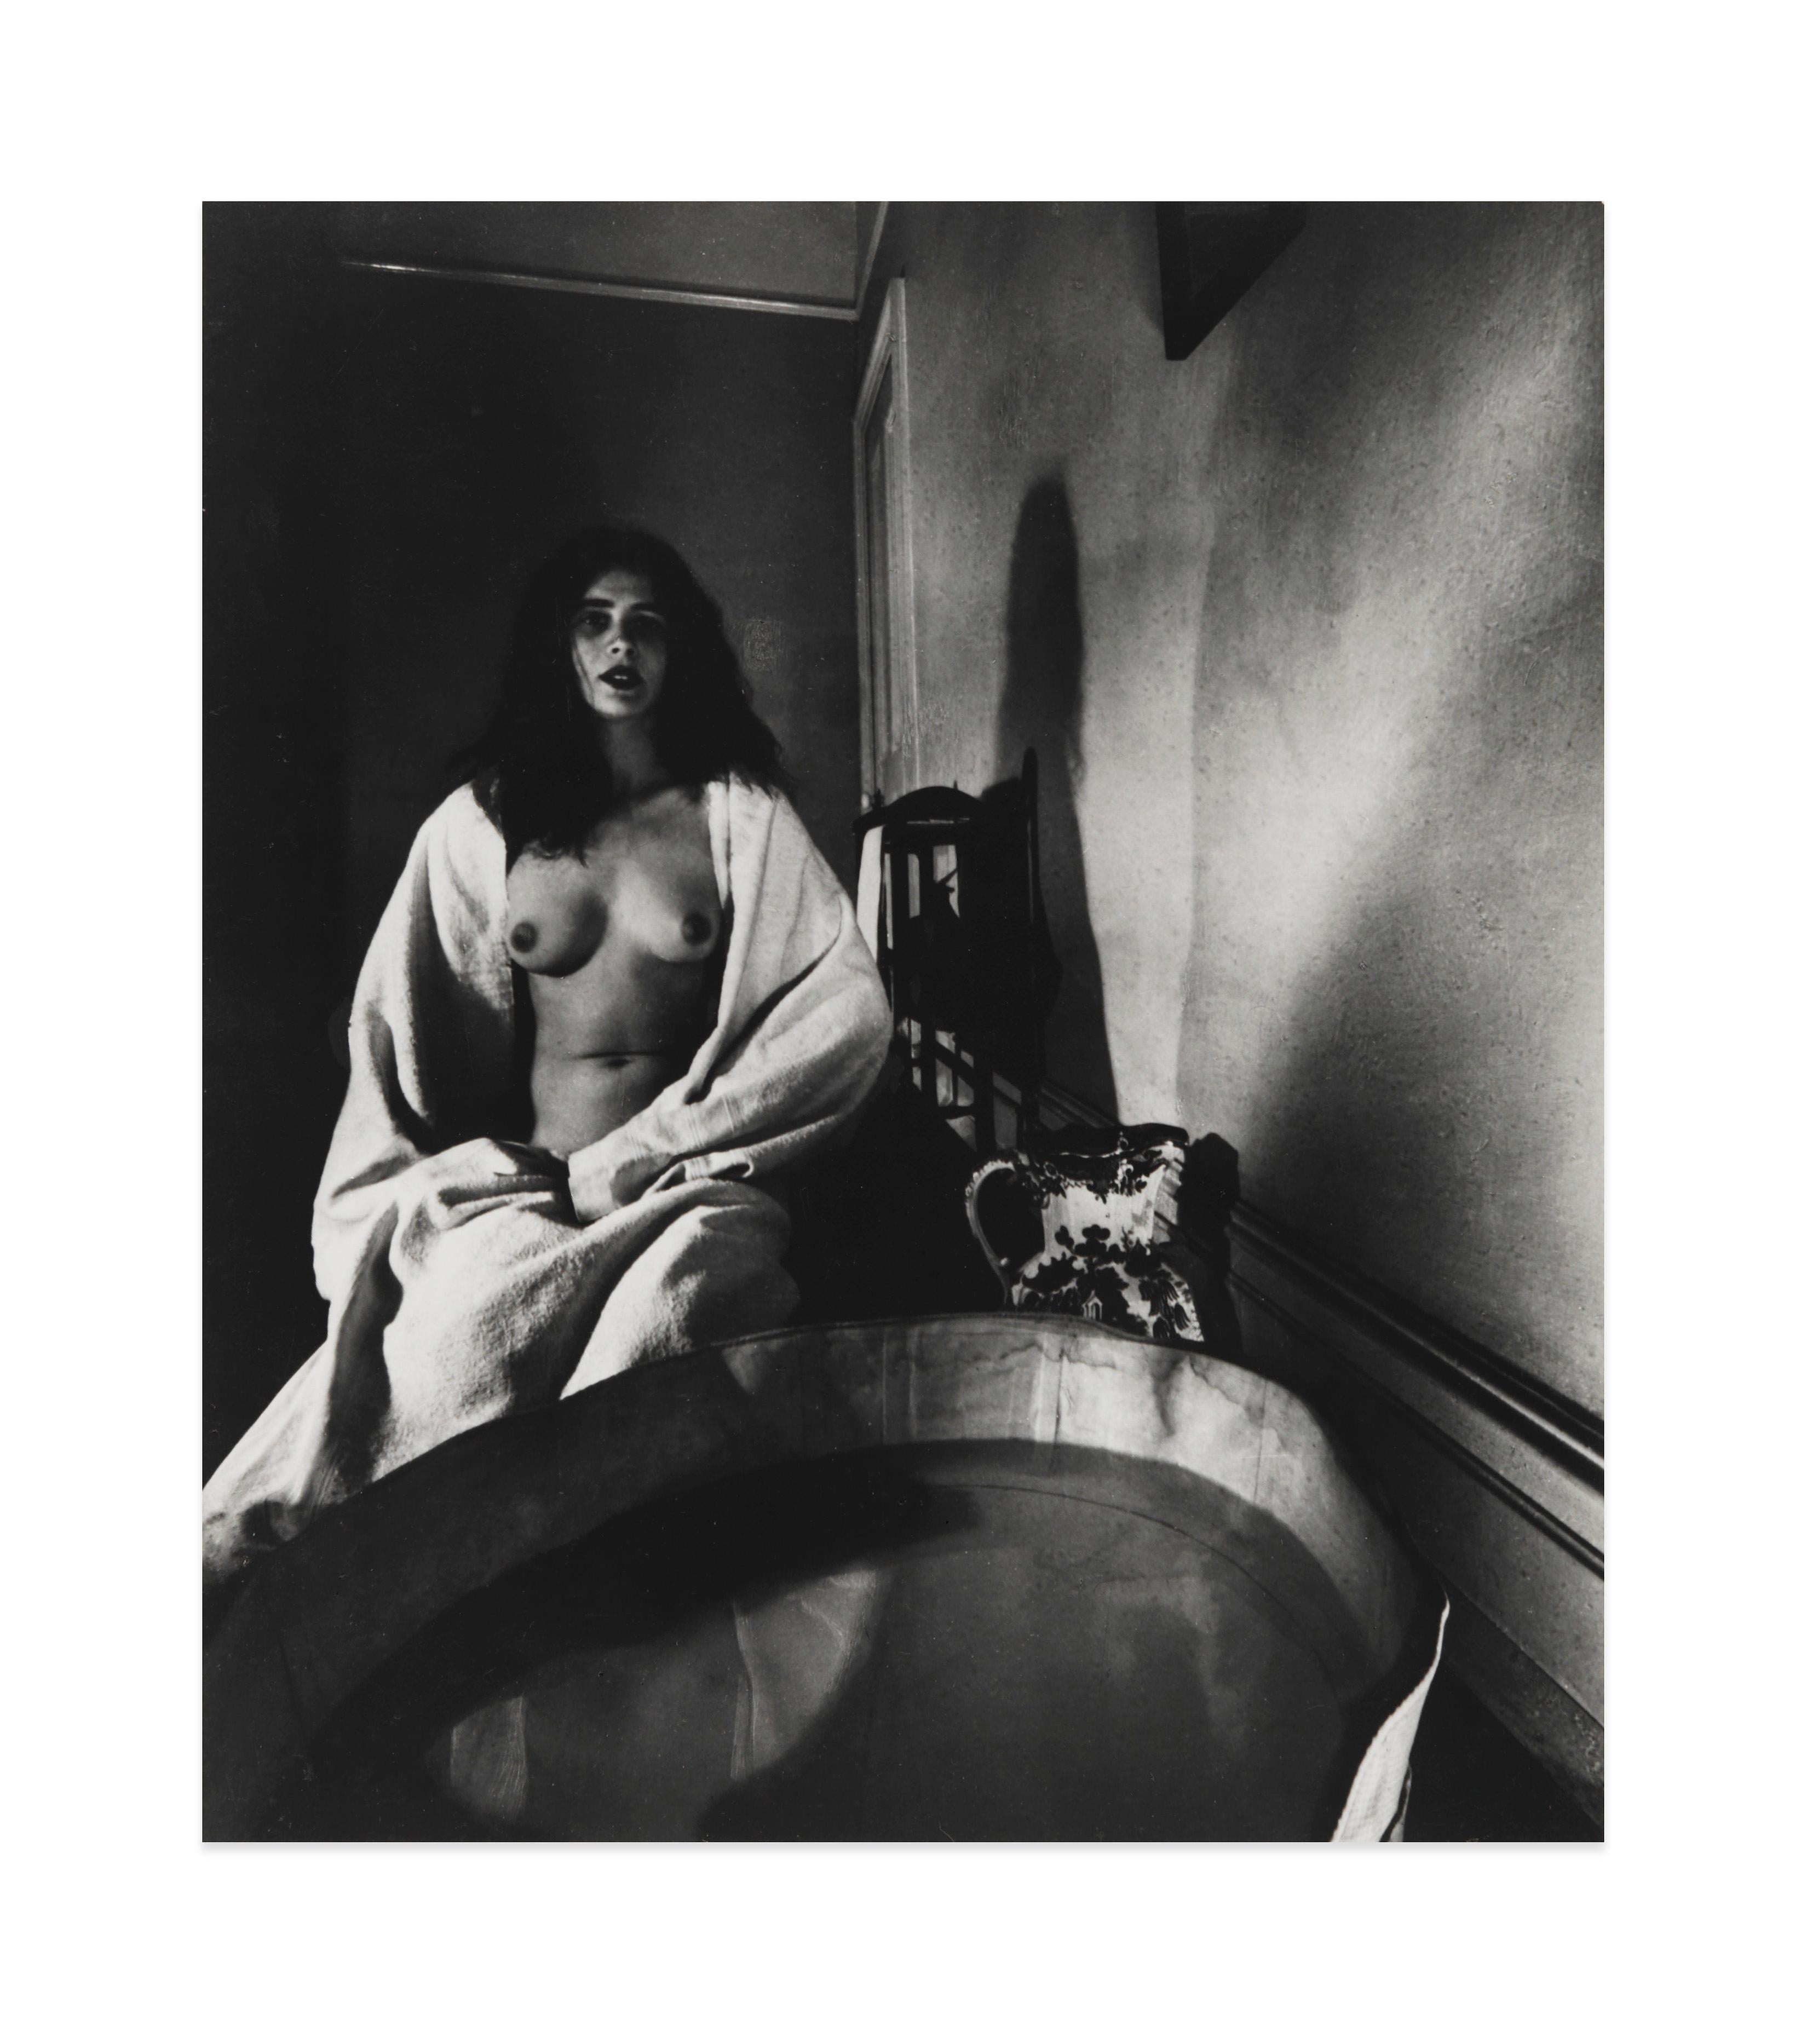 Nude, The Haunted Bathroom, Campden Hill, London - Photograph by Bill Brandt